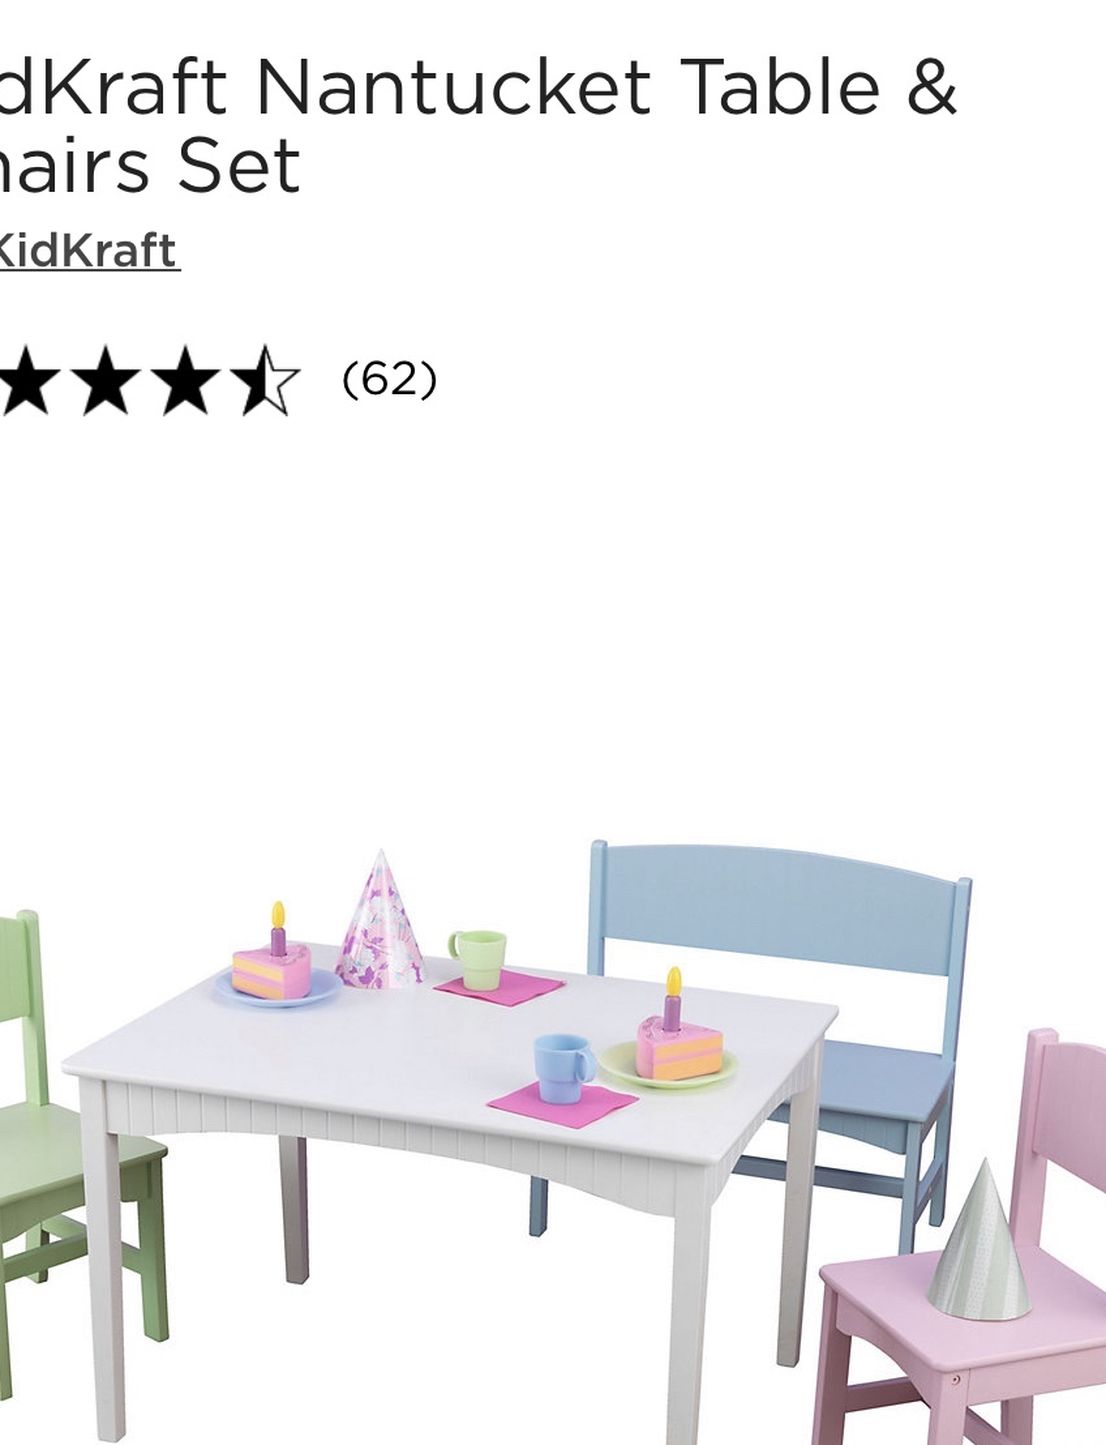 BRAND NEW KIDS TABLE AND CHAIRS SET $100